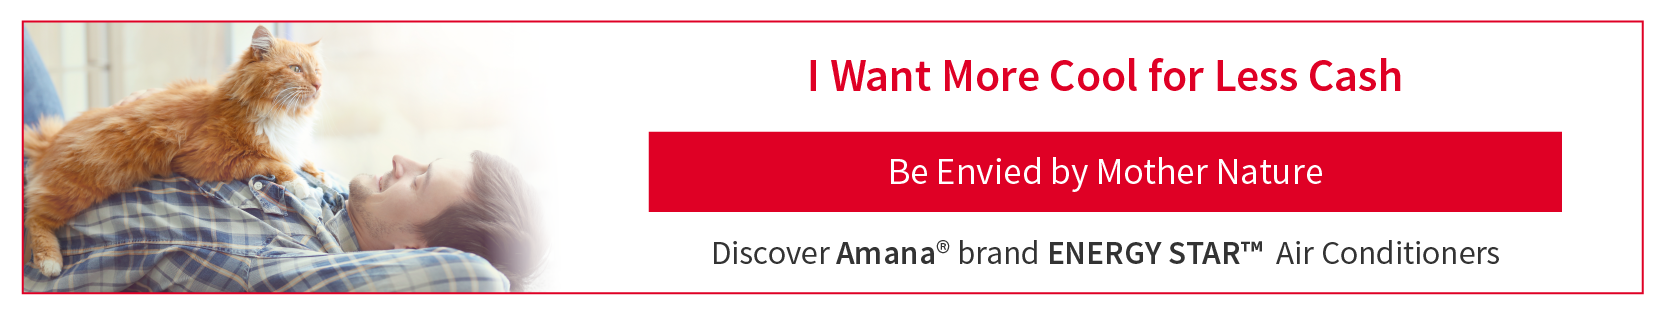 Amana brand Air Conditioners